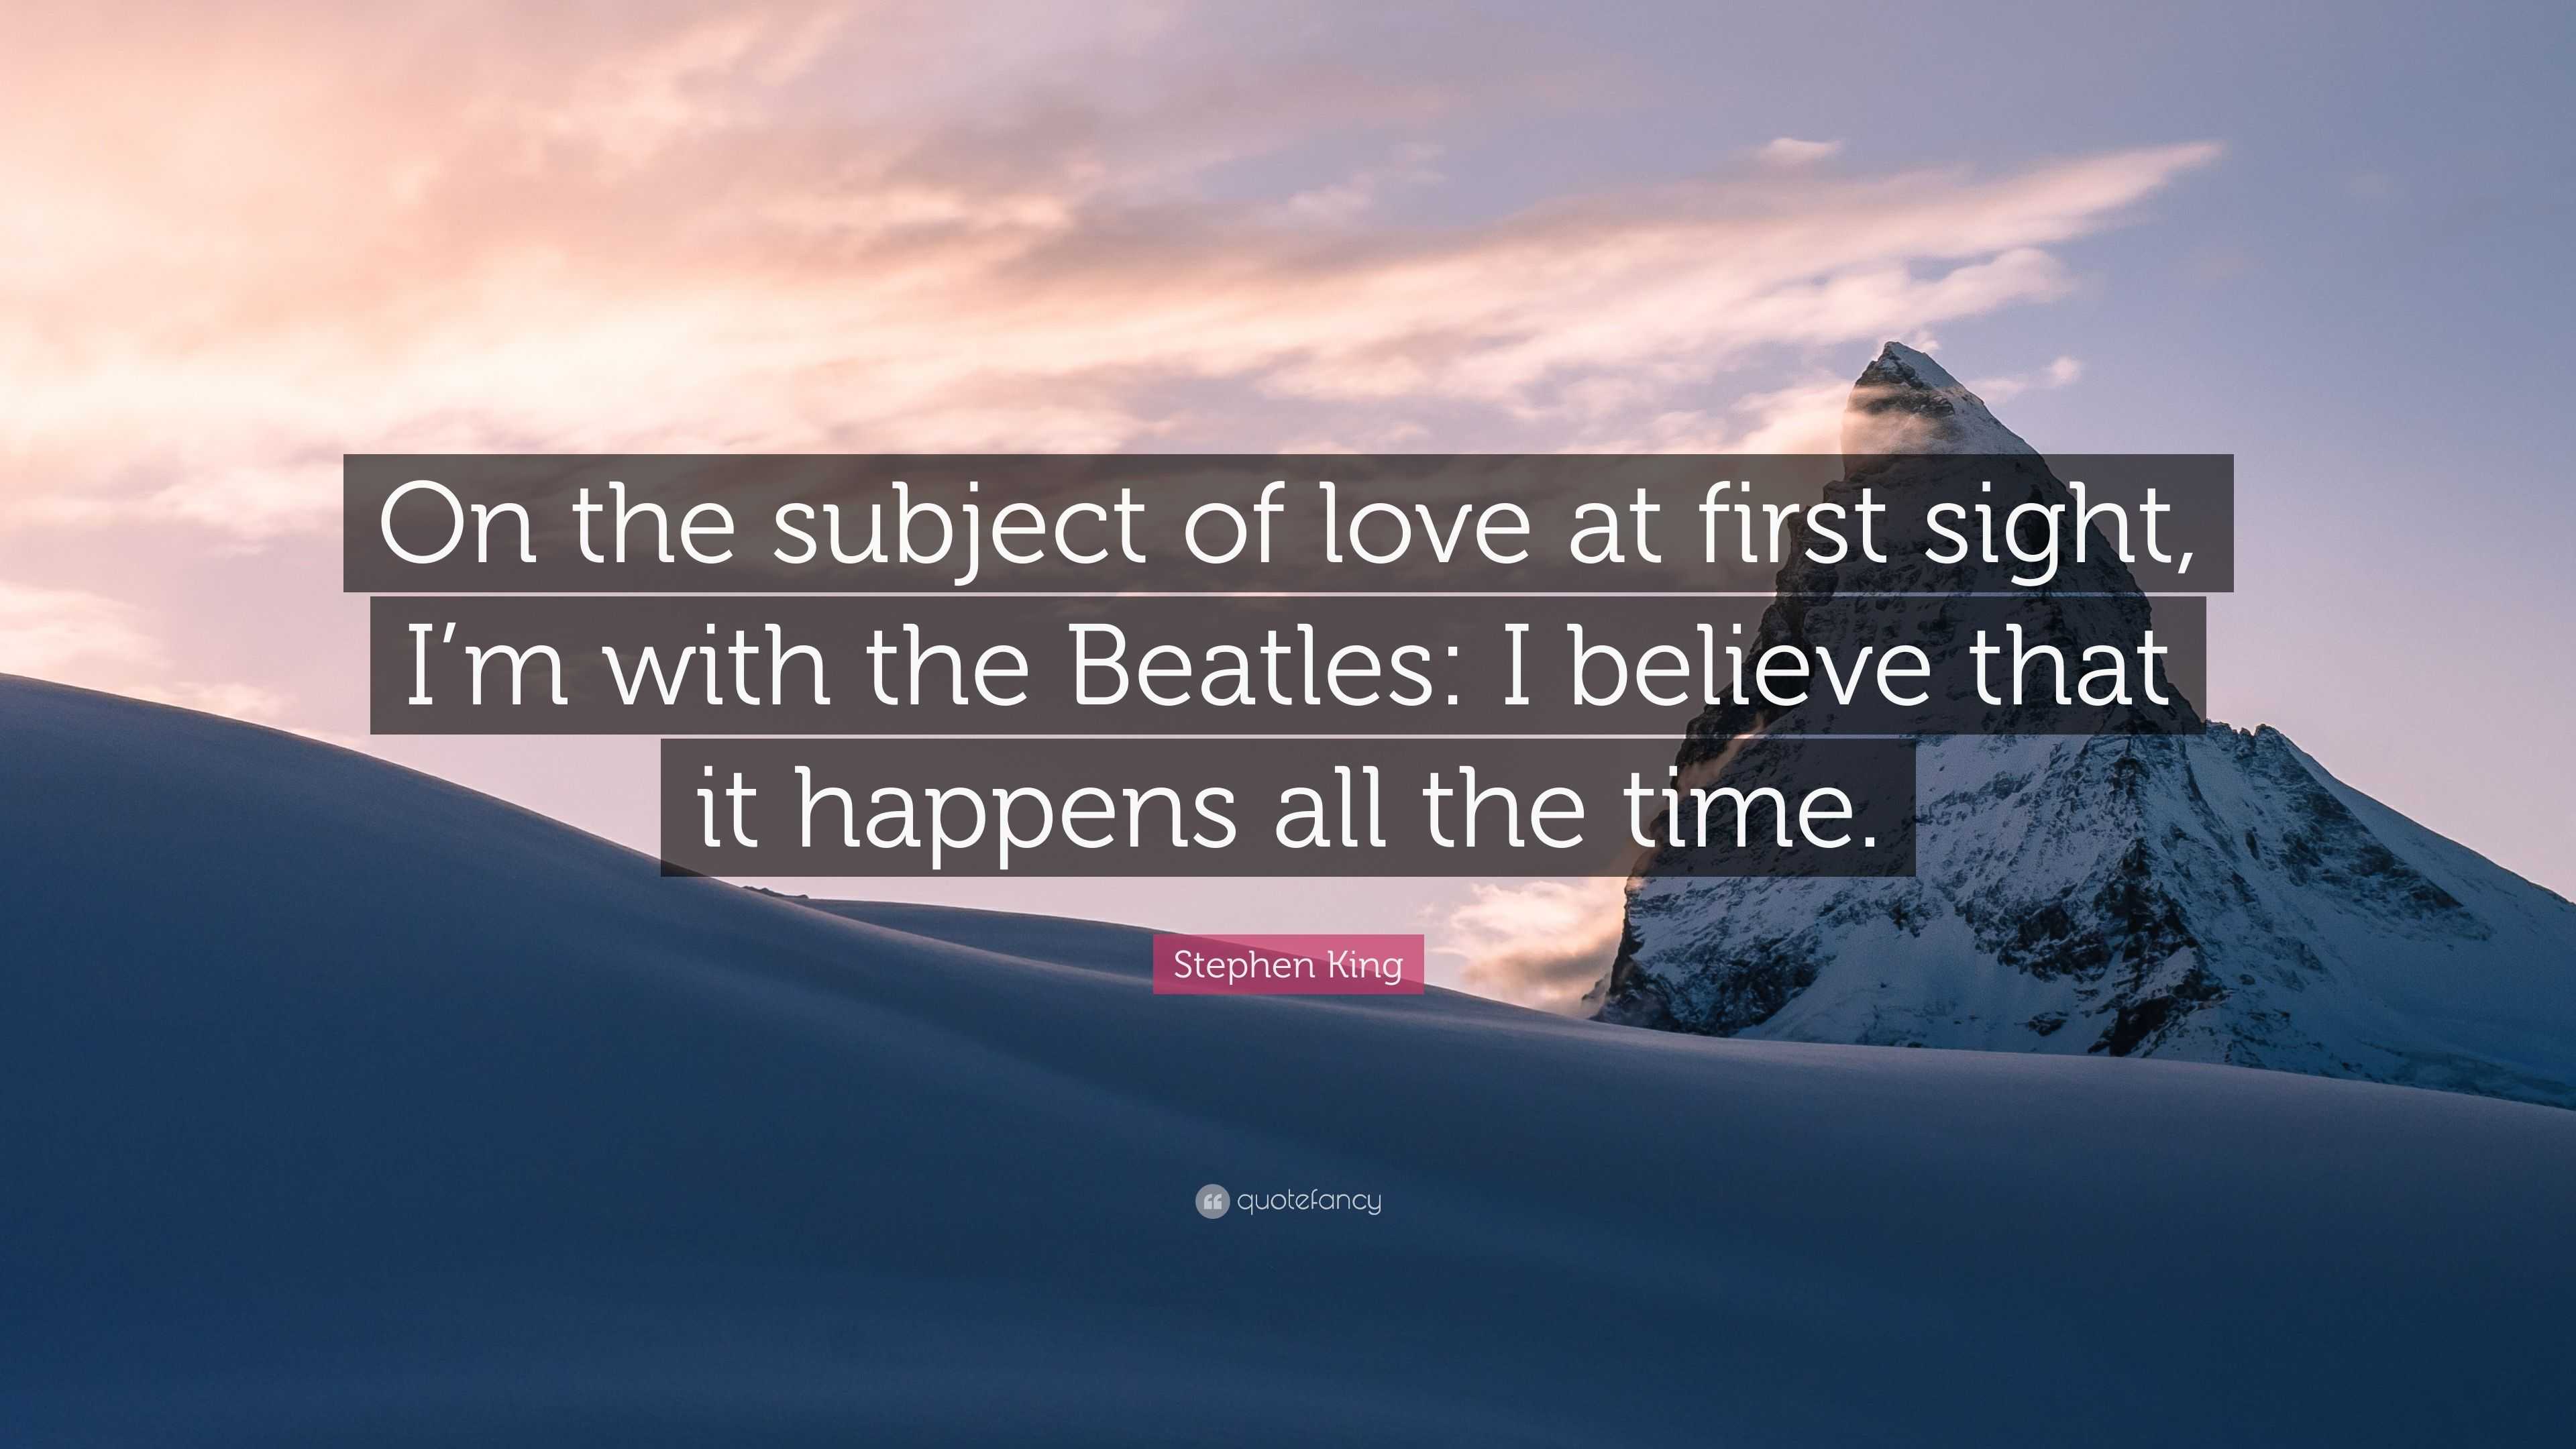 Stephen King Quote “ the subject of love at first sight I